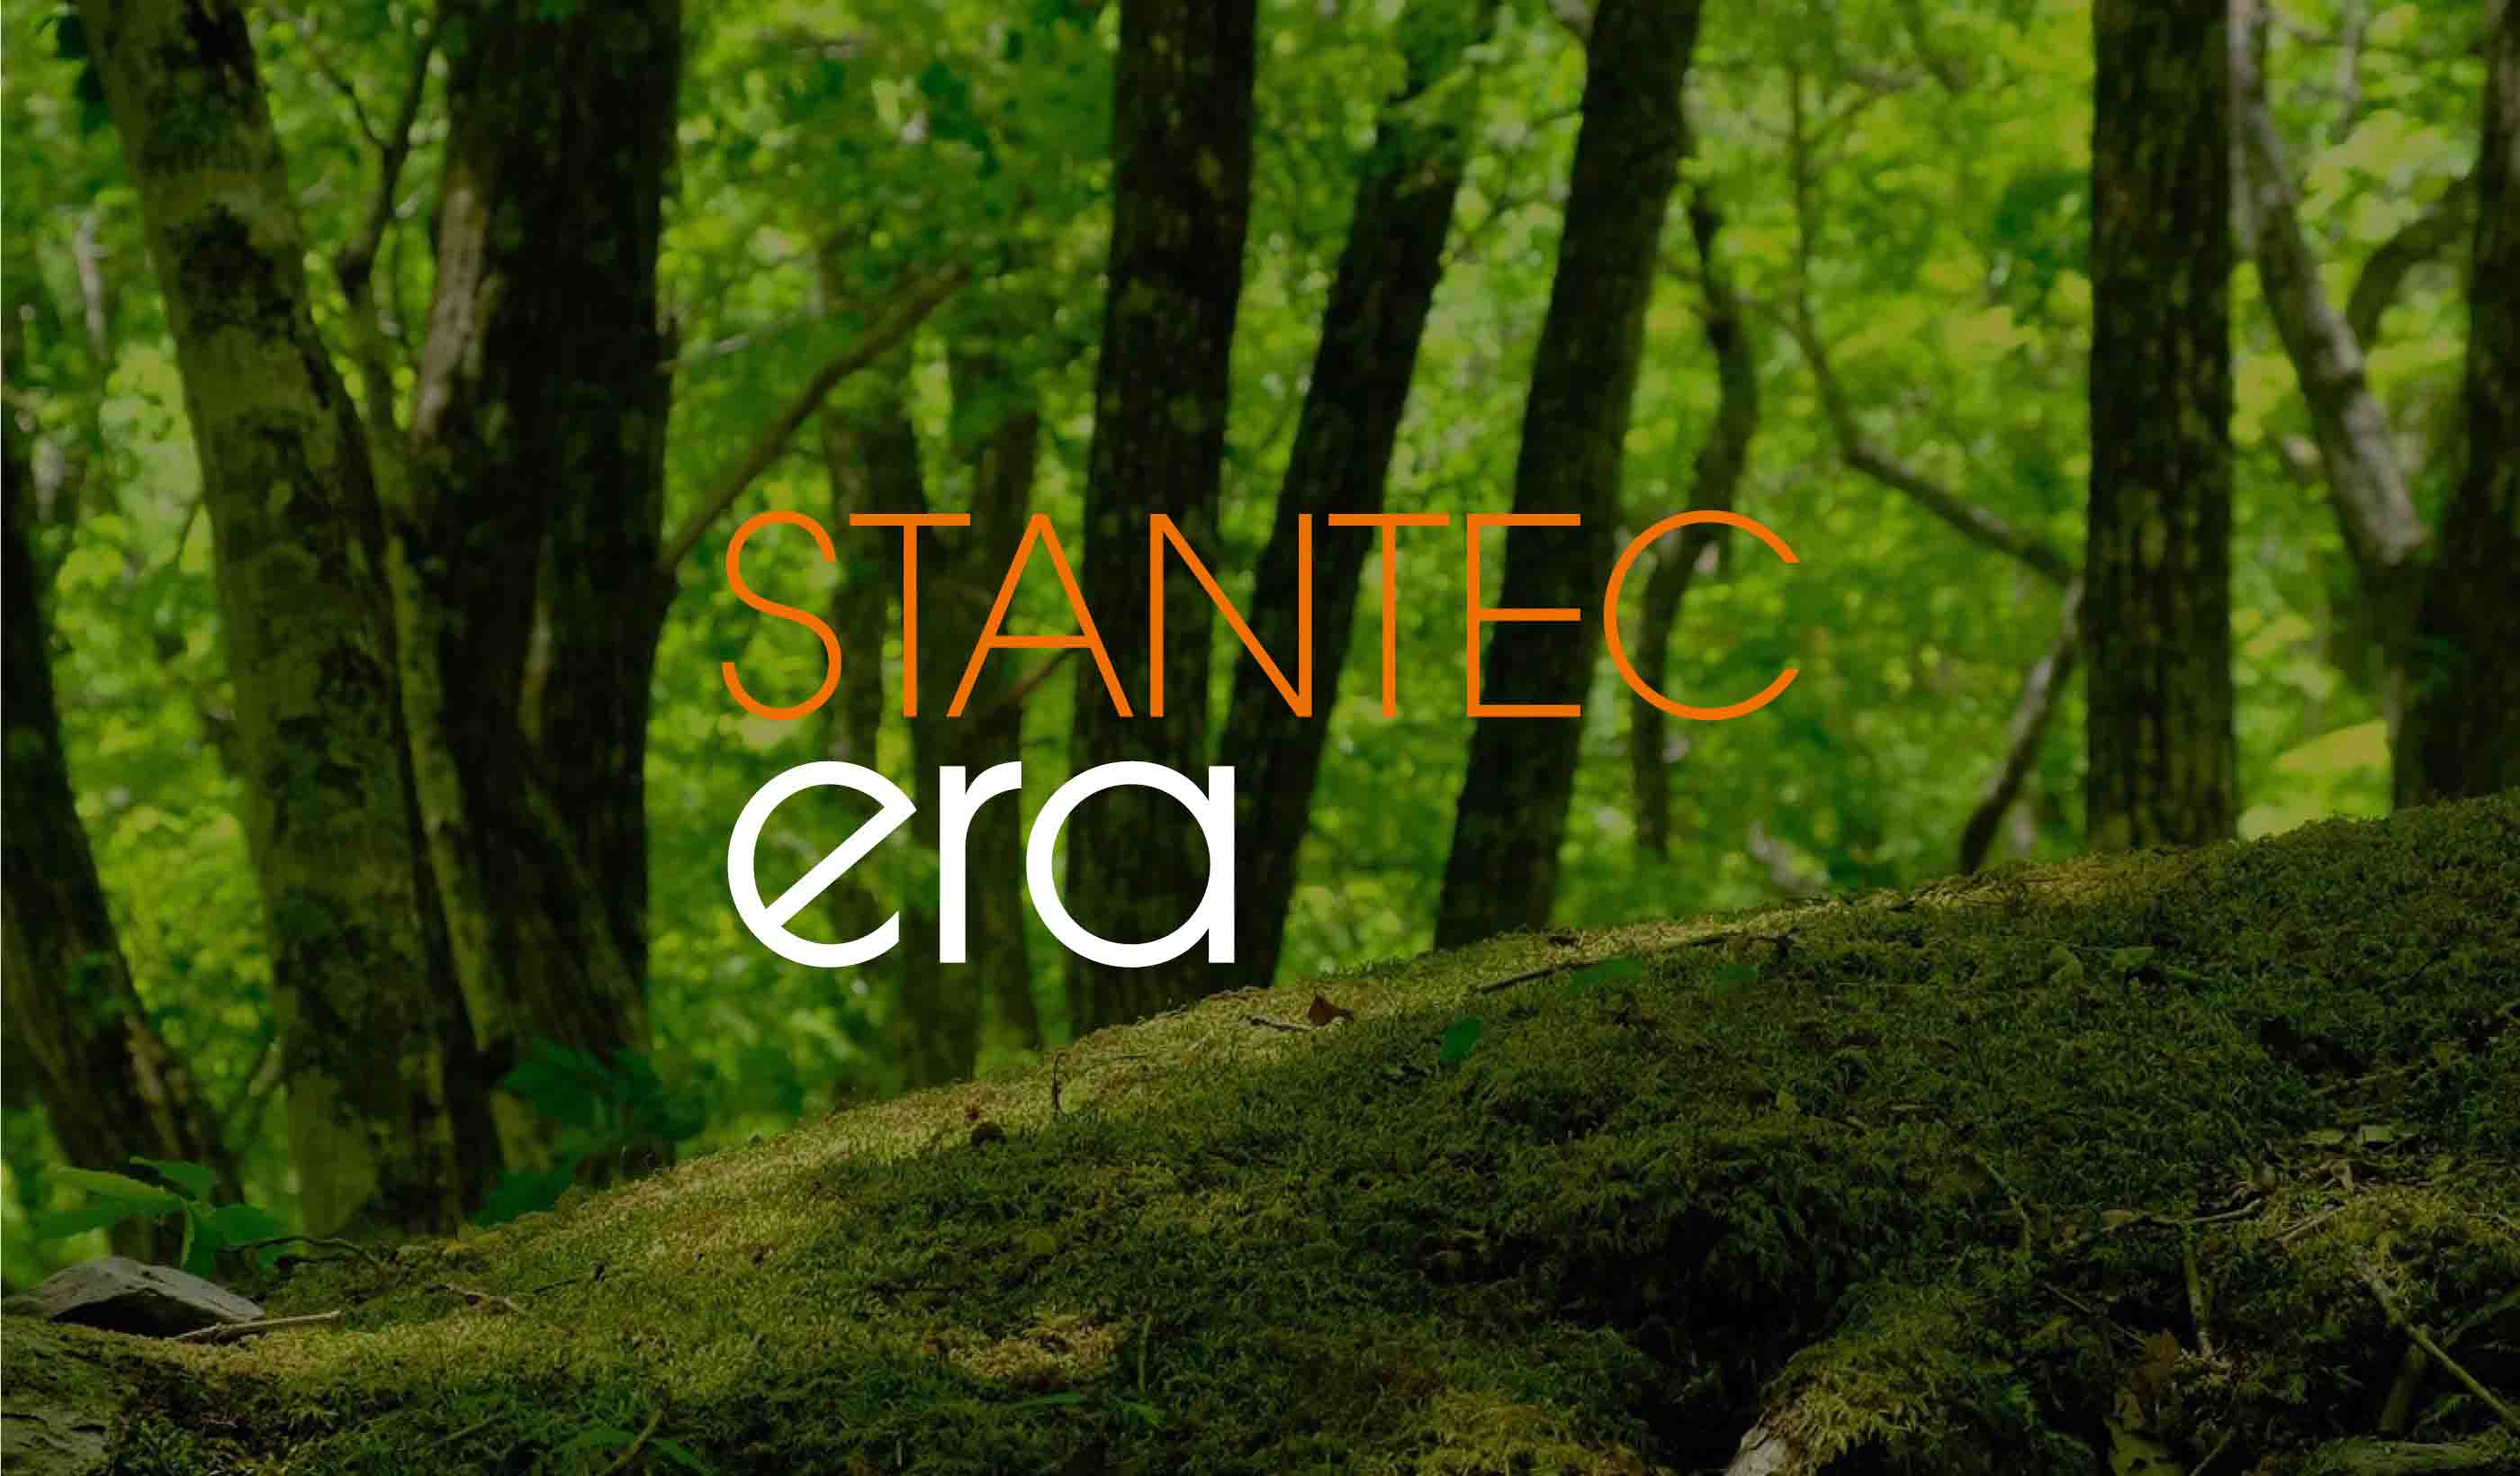 Stantec ERA Issue 10 | The Carbon Issue